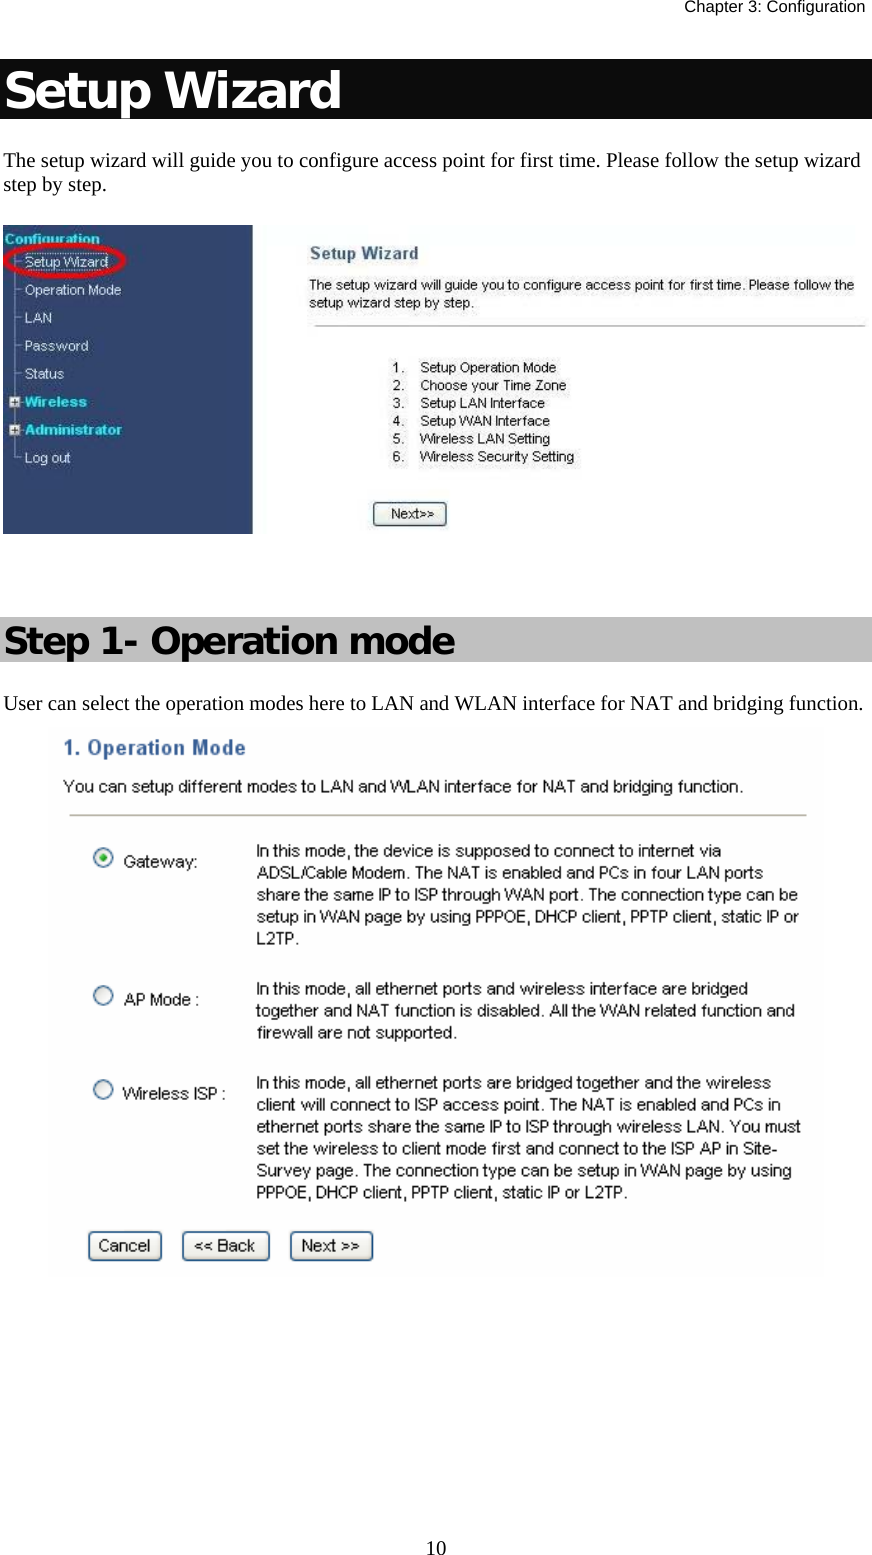   Chapter 3: Configuration  10Setup Wizard  The setup wizard will guide you to configure access point for first time. Please follow the setup wizard step by step.   Step 1- Operation mode User can select the operation modes here to LAN and WLAN interface for NAT and bridging function.     